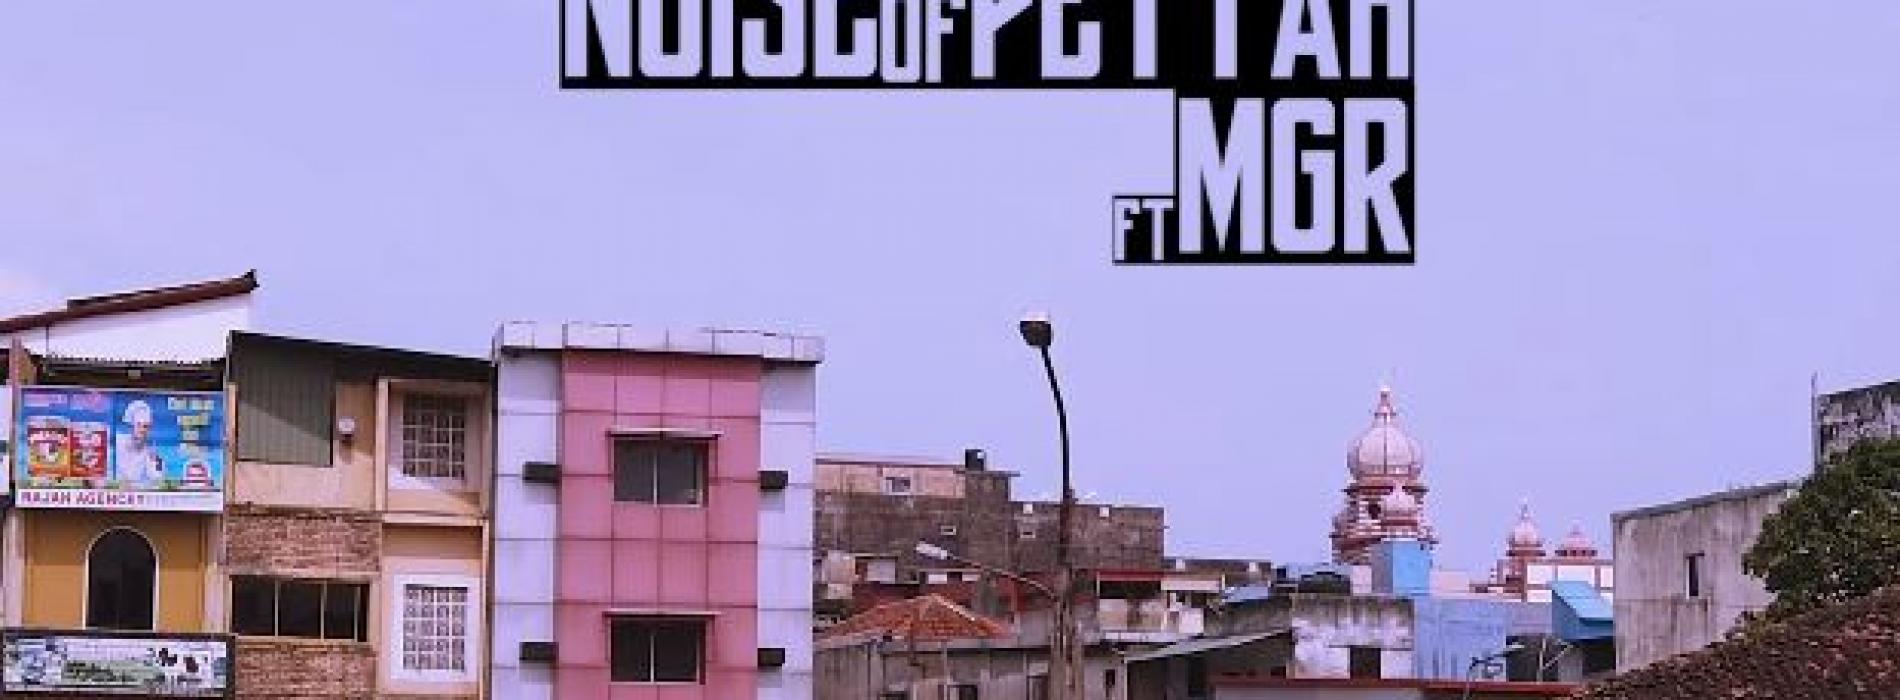 Noise Of Pettah X MGR Official Music Video